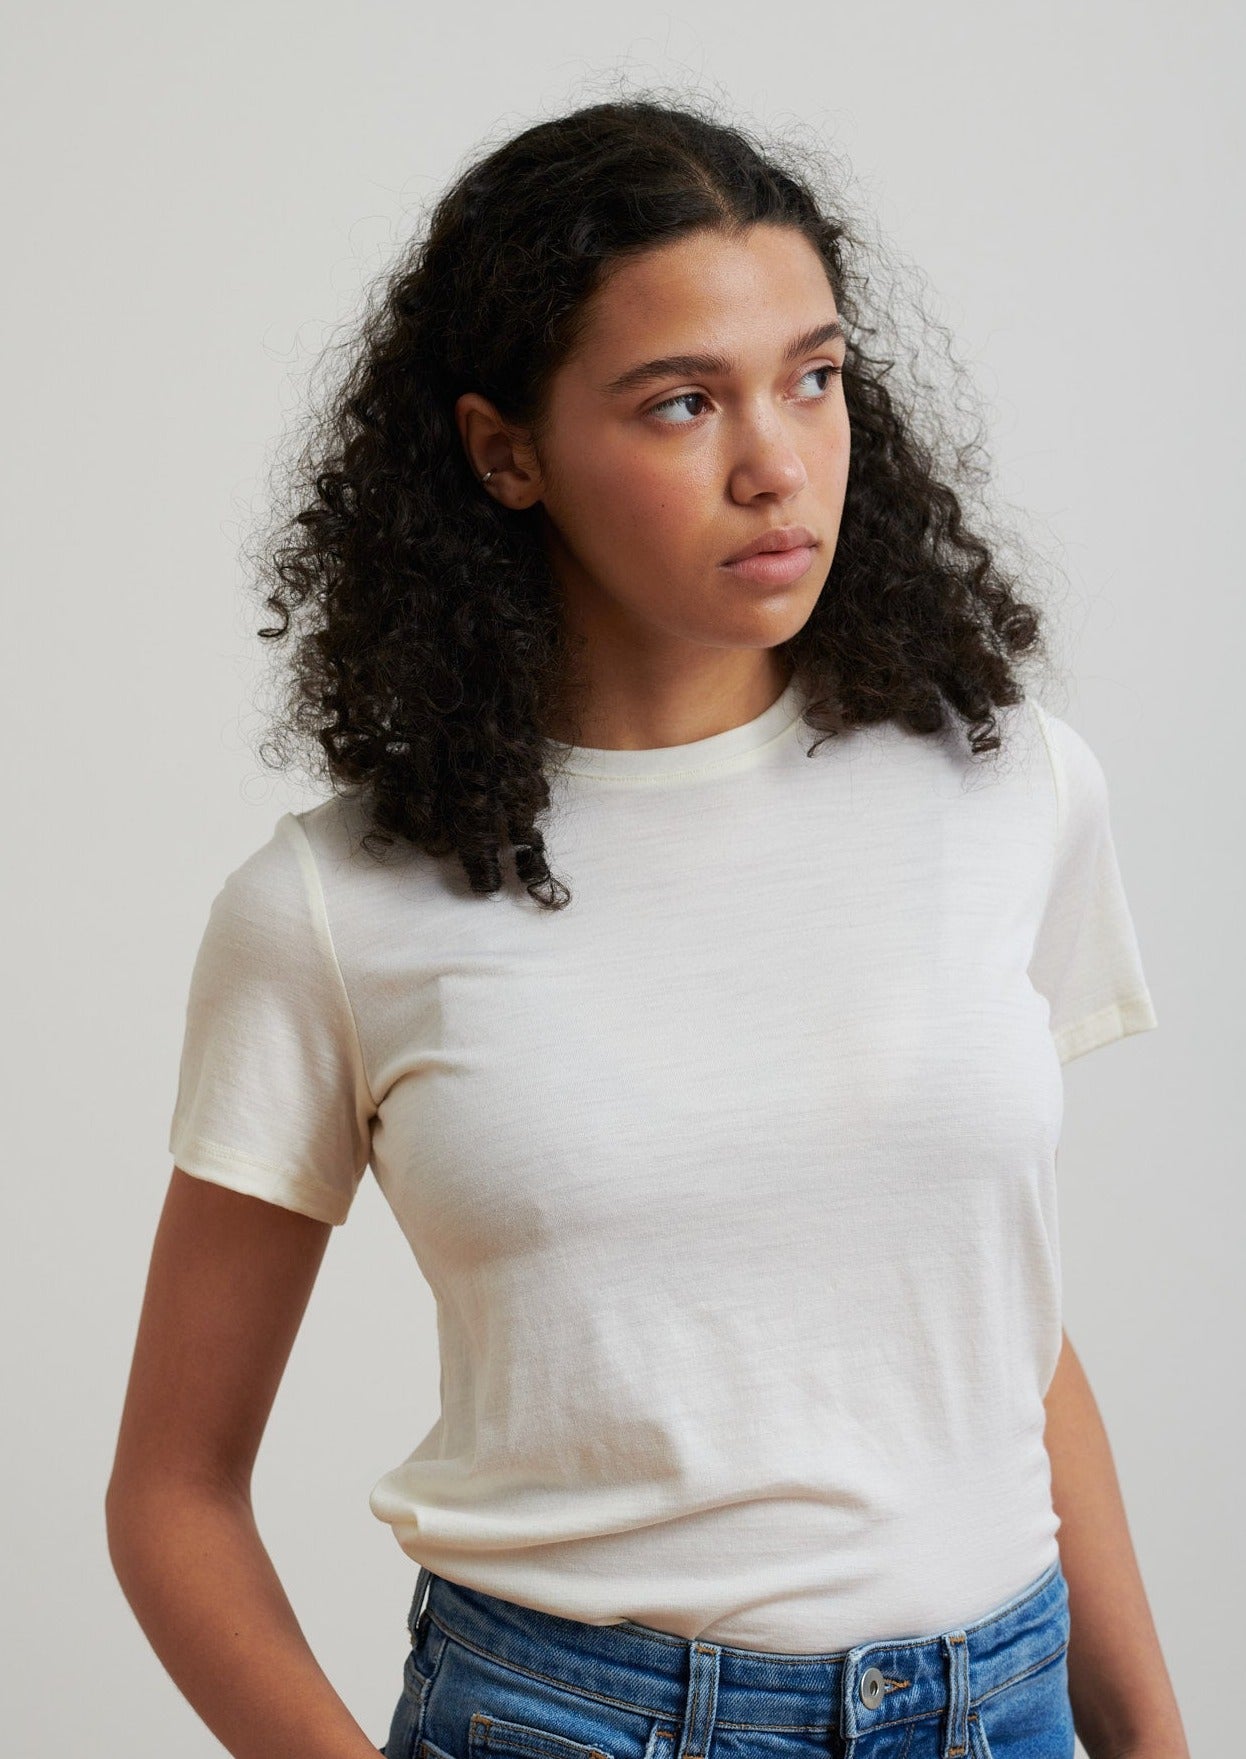 A wardrobe essential, this classic t-shirt in ethical wool is soft and breathable and designed to wear all seasons.